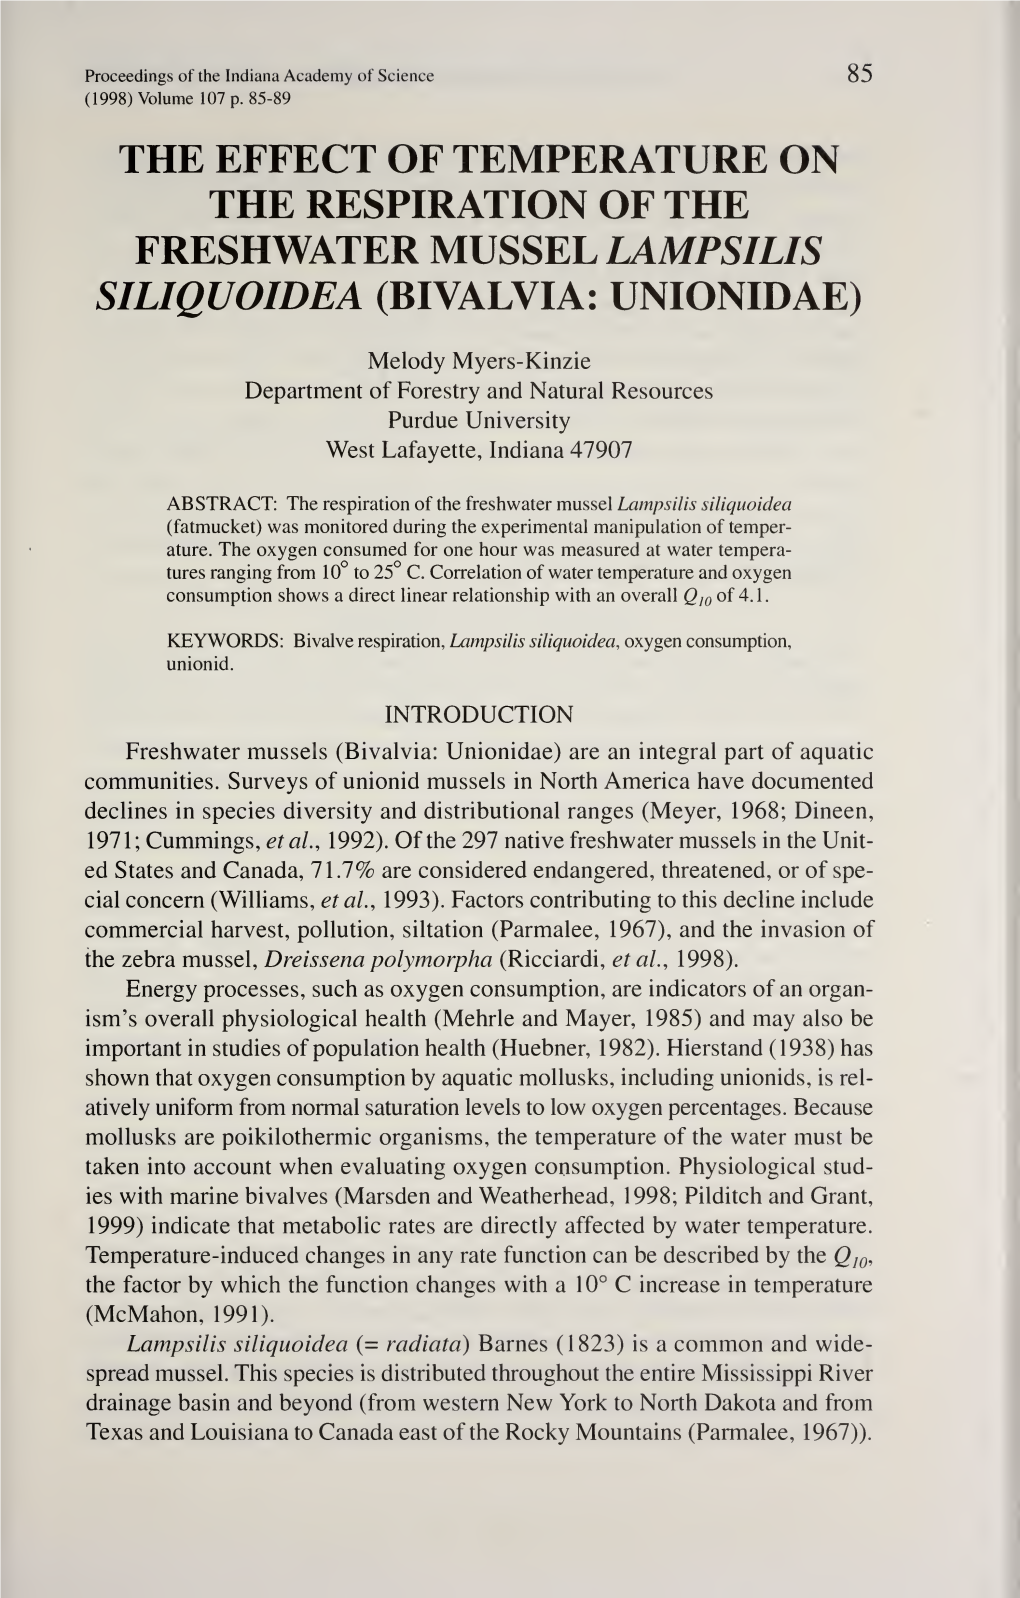 Proceedings of the Indiana Academy of Science 85